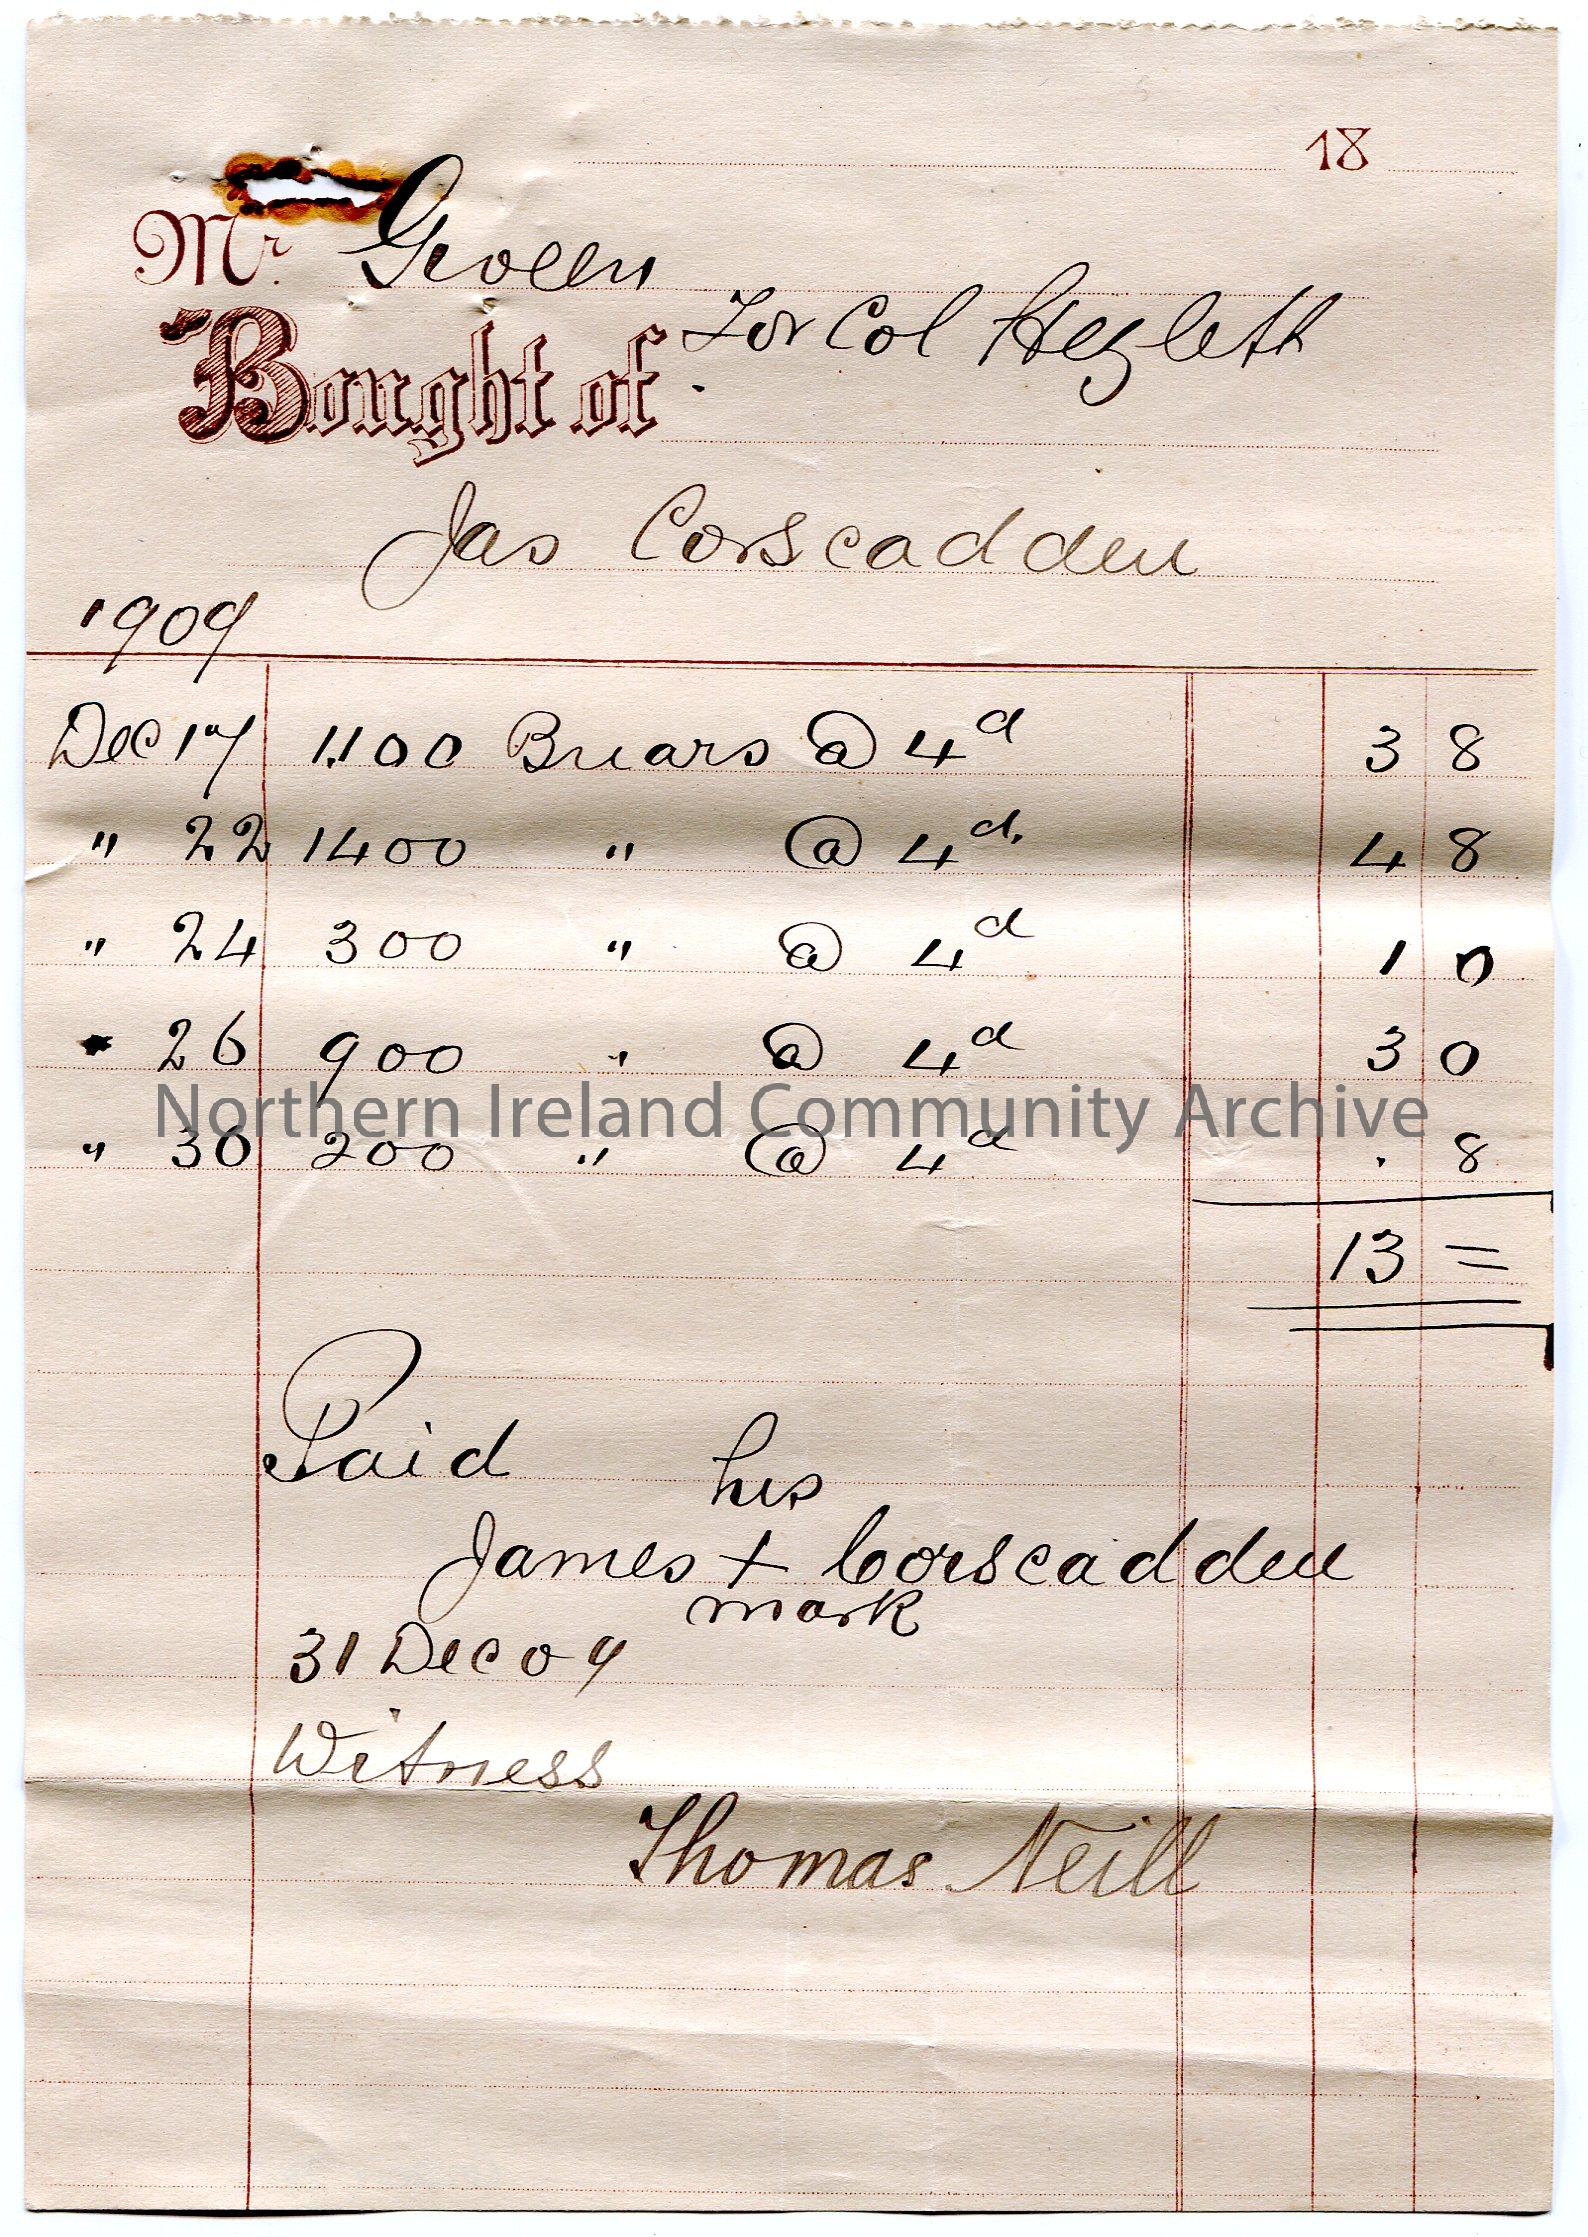 Handwritten receipt for payment of £0.13.0 from Mr [Robert] Giveen on behalf of Col Hezlett [Hezlet]. Payment to James Corscadden for the purchas…